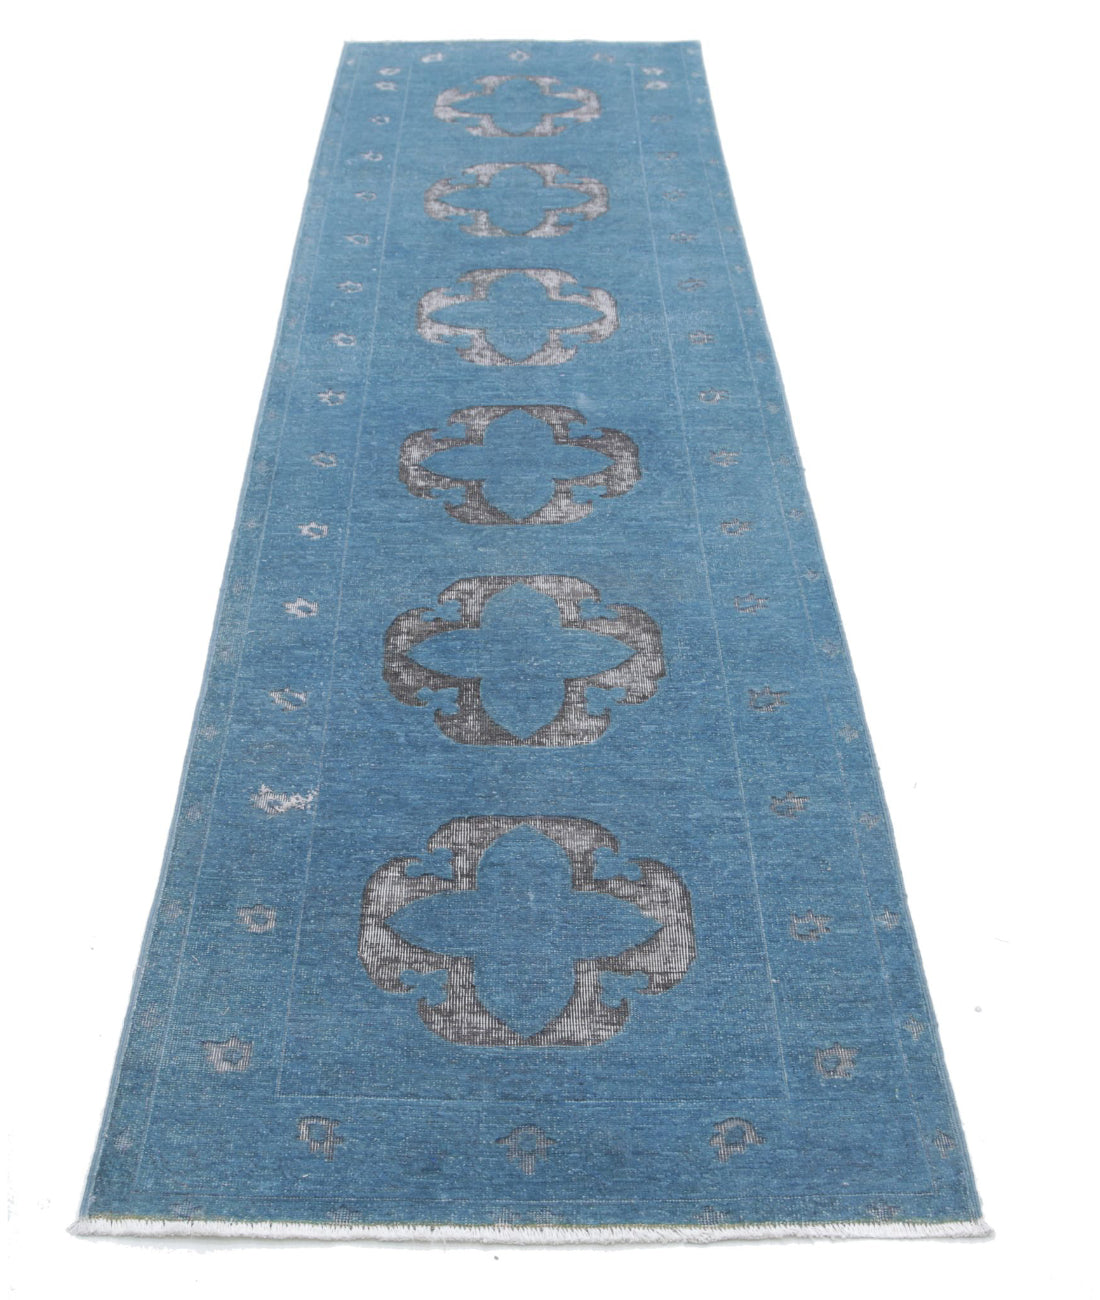 Hand Knotted Onyx Wool Rug - 2'6'' x 9'9'' 2'6'' x 9'9'' (75 X 293) / Blue / Blue